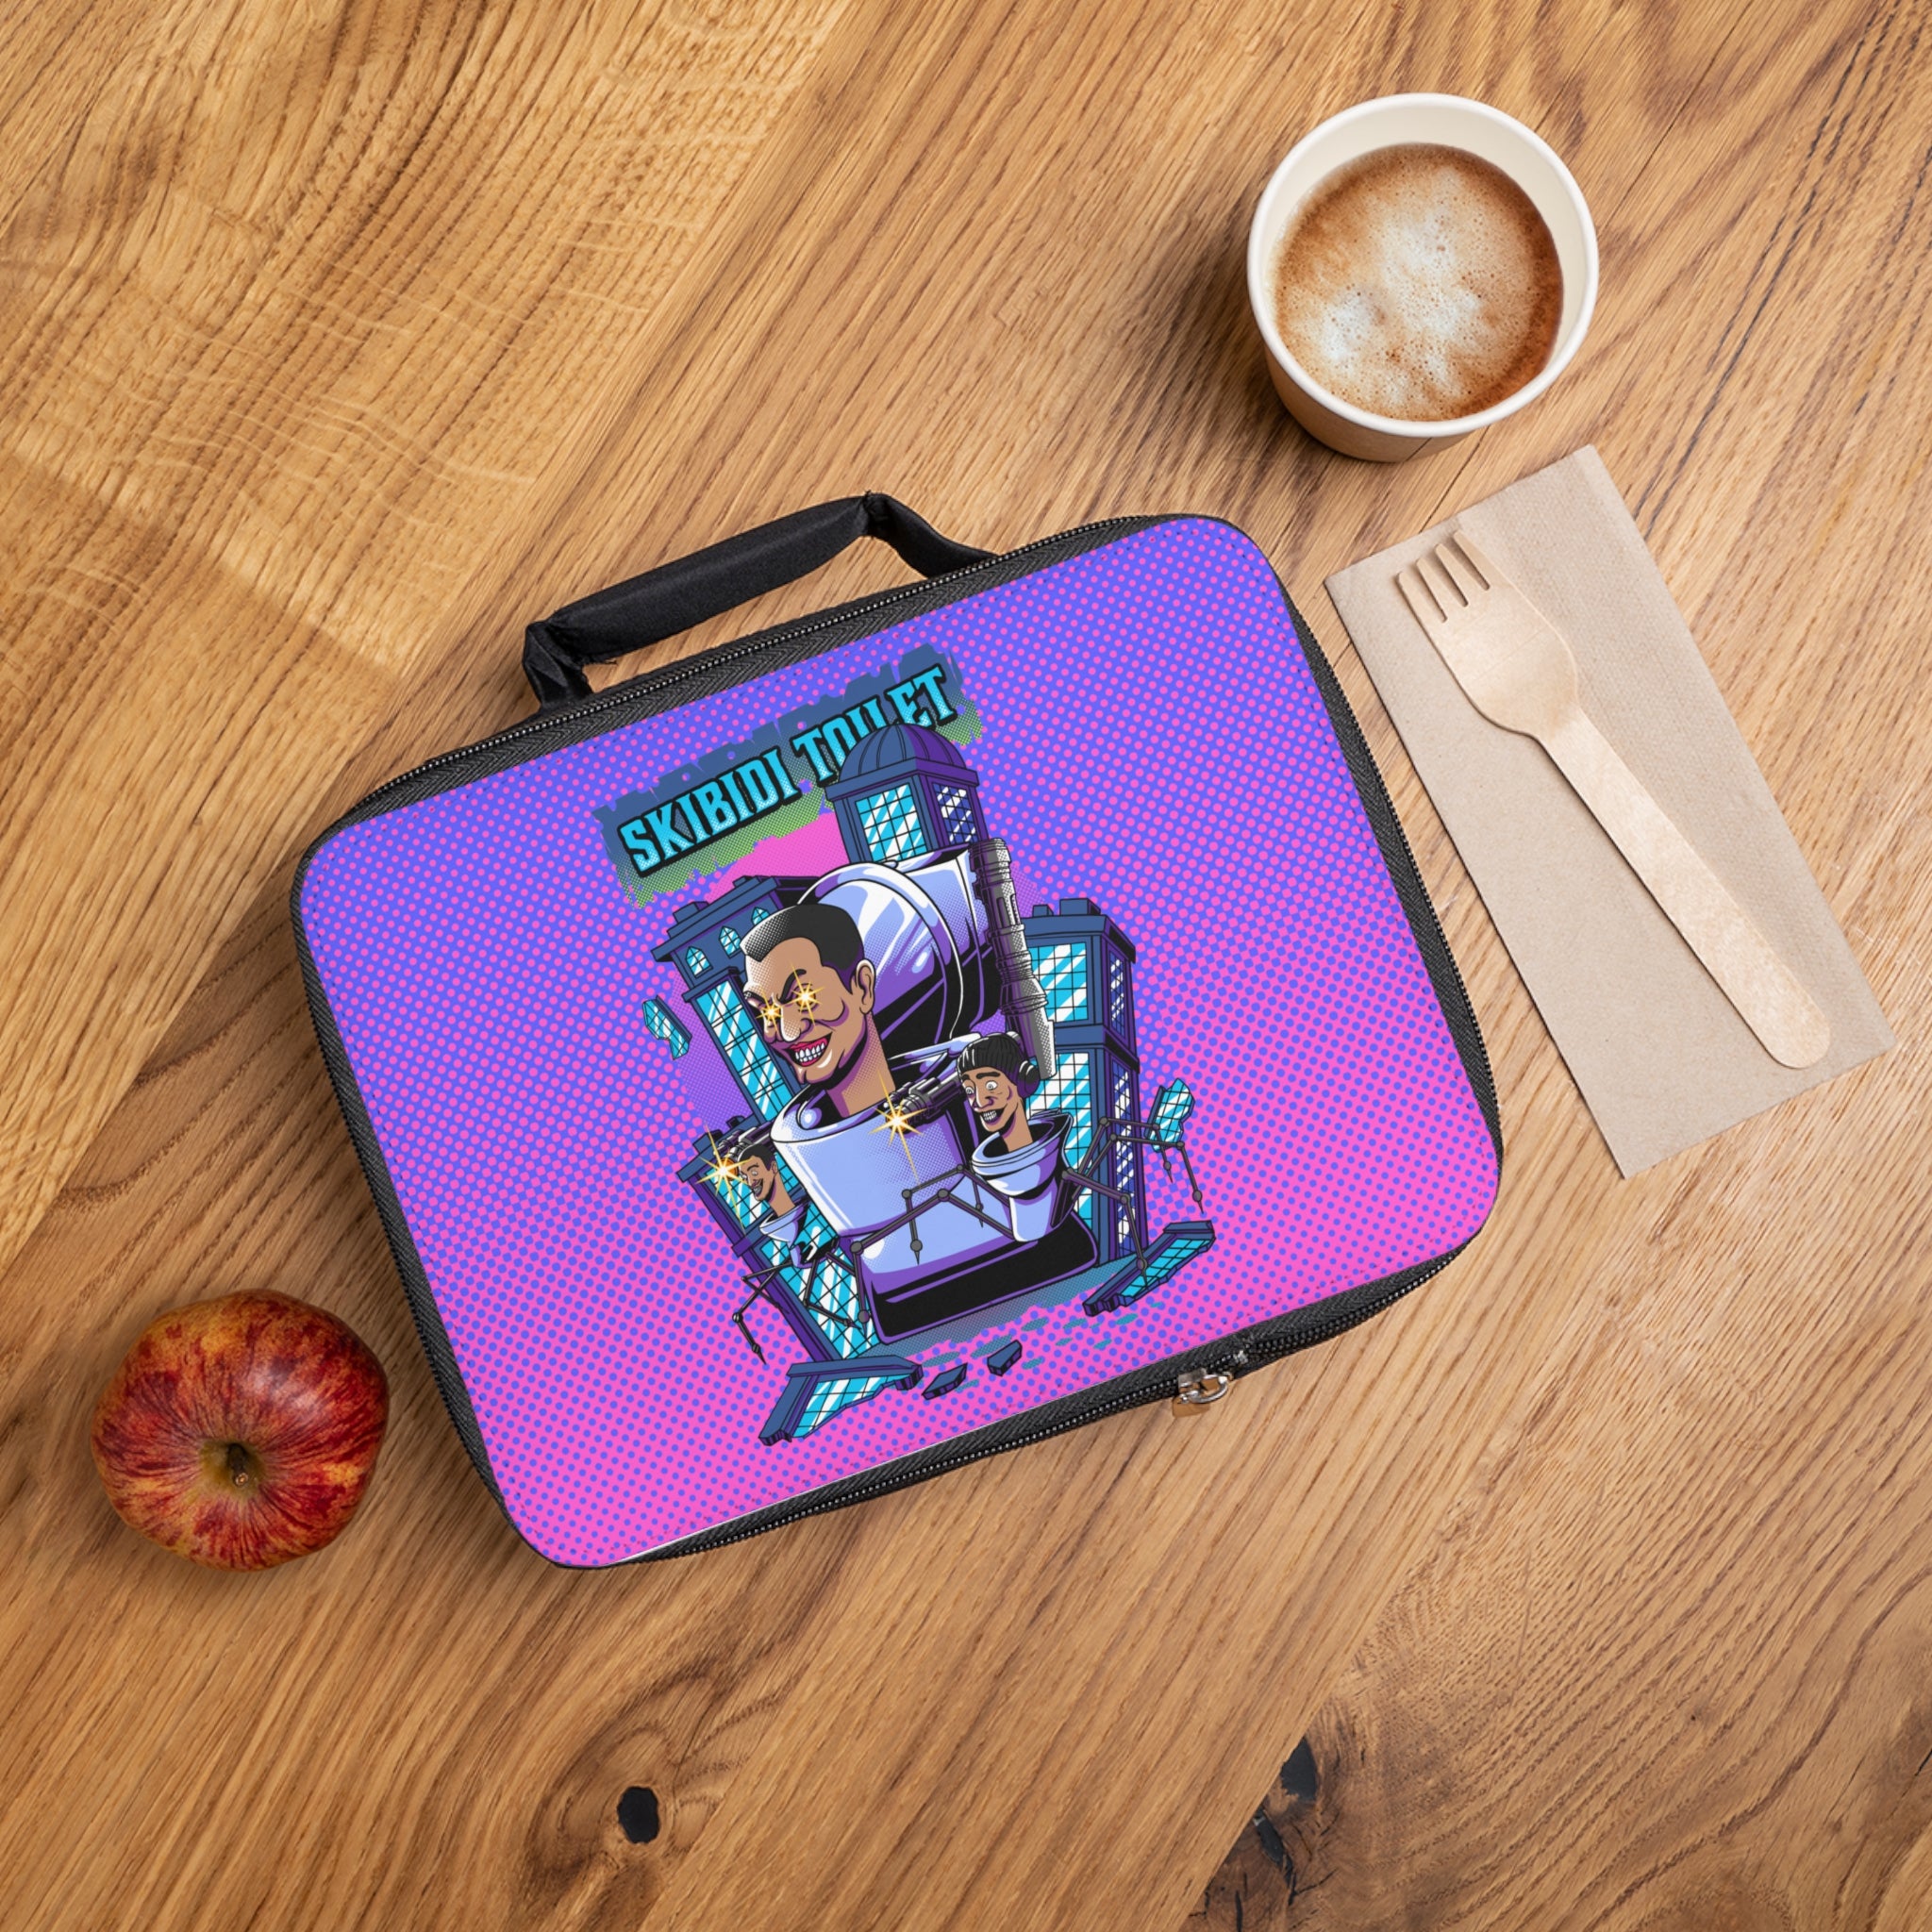 Skibidi takeover lunch bag on wooden table, purple gradient, apple, fork and coffee